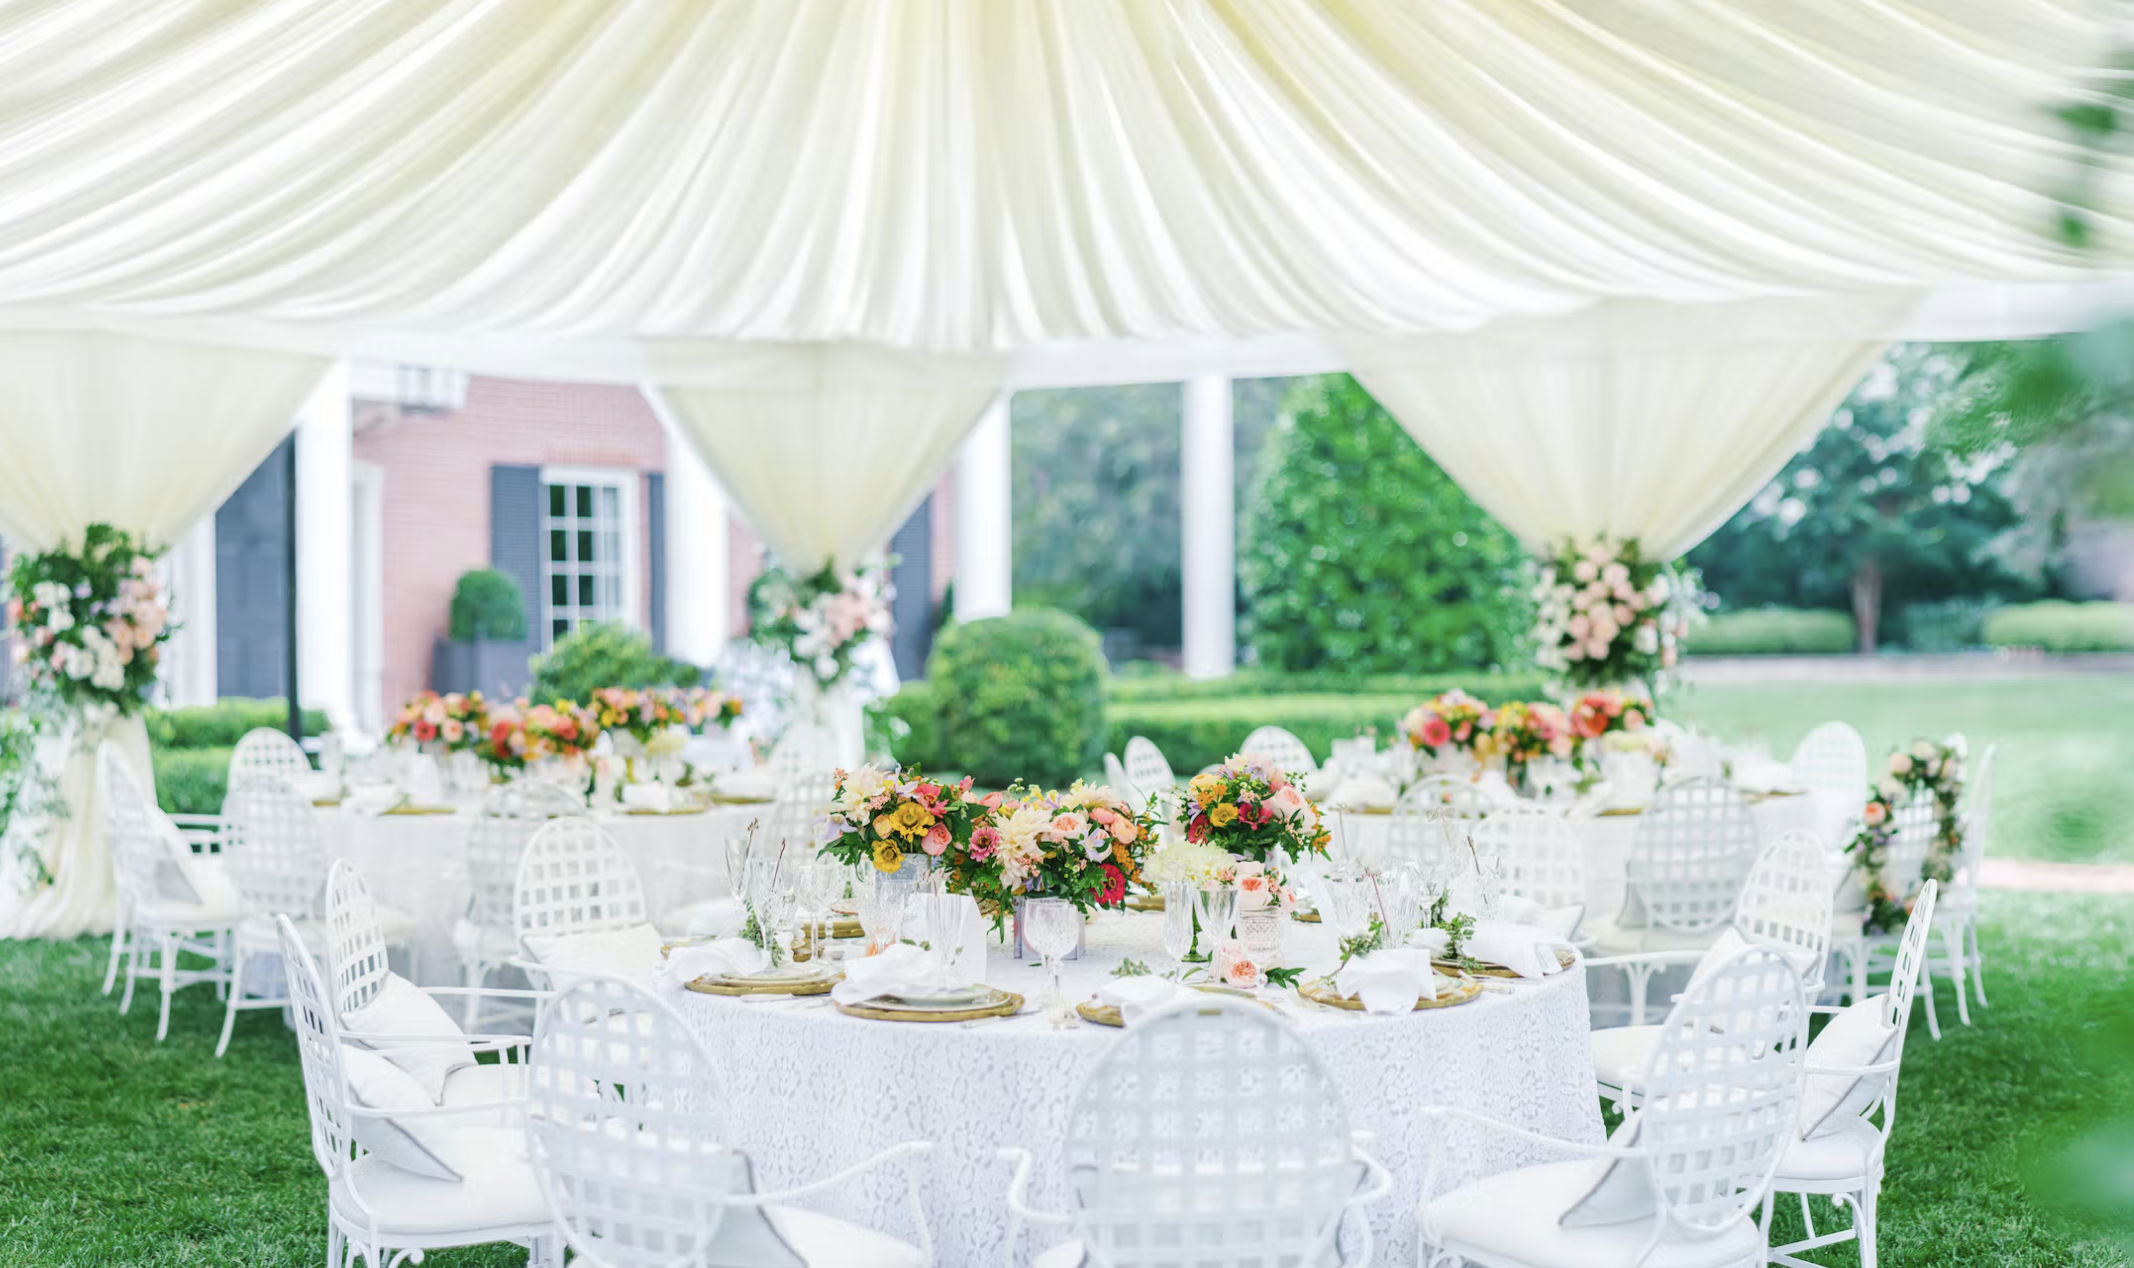 Indiana Bridal Shower Venues - Outdoor